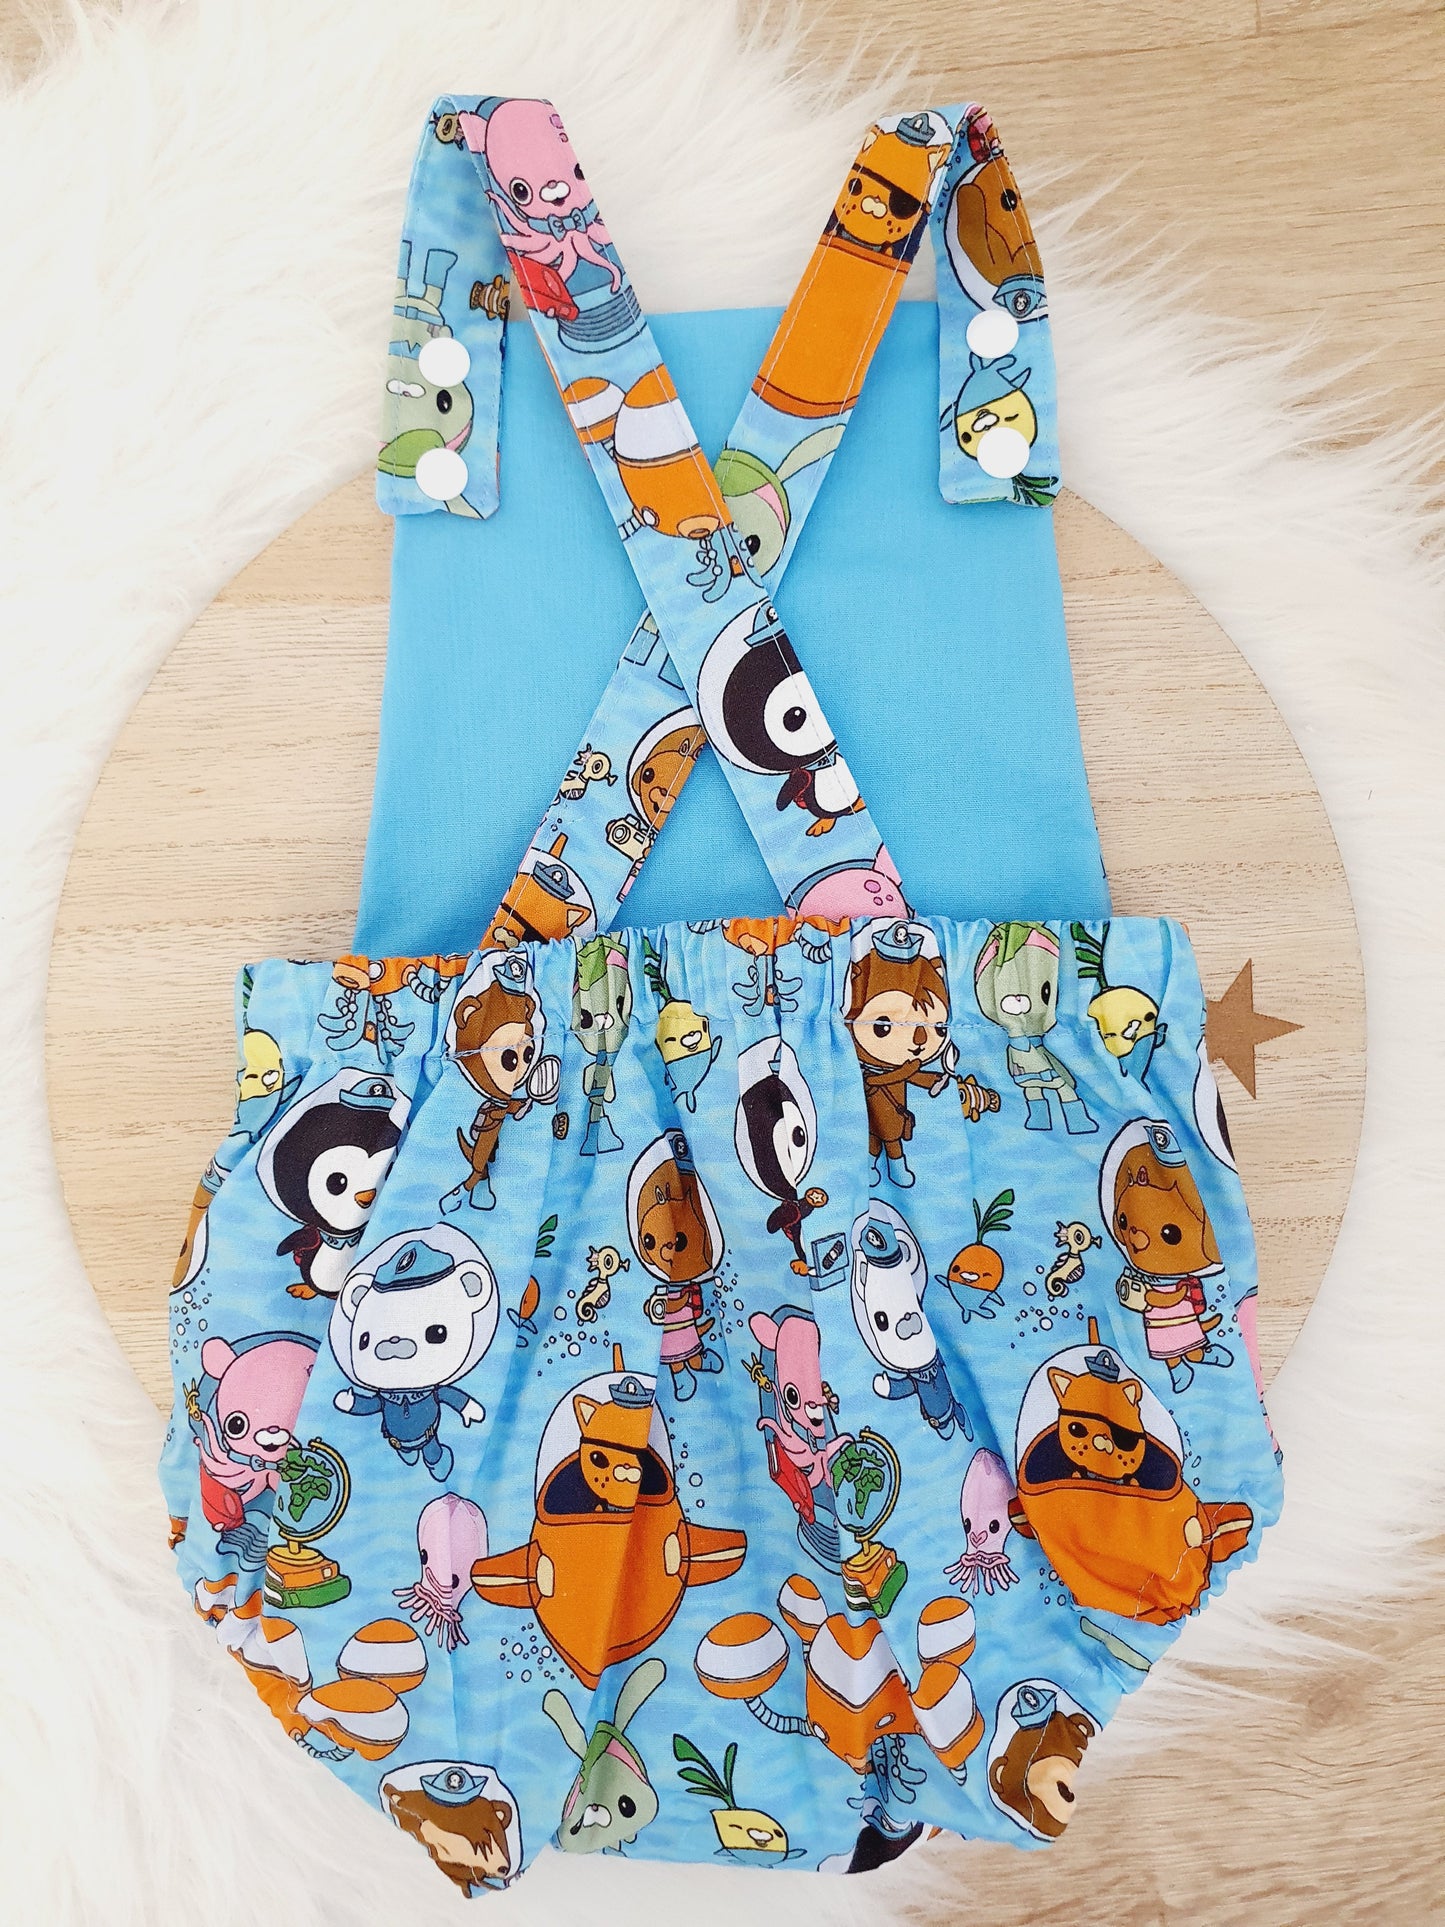 OCTONAUTS PRINT Baby Romper, Handmade Baby Clothing, Size 1 - 1st Birthday Clothing / Cake Smash Outfit, 12 - 18 months